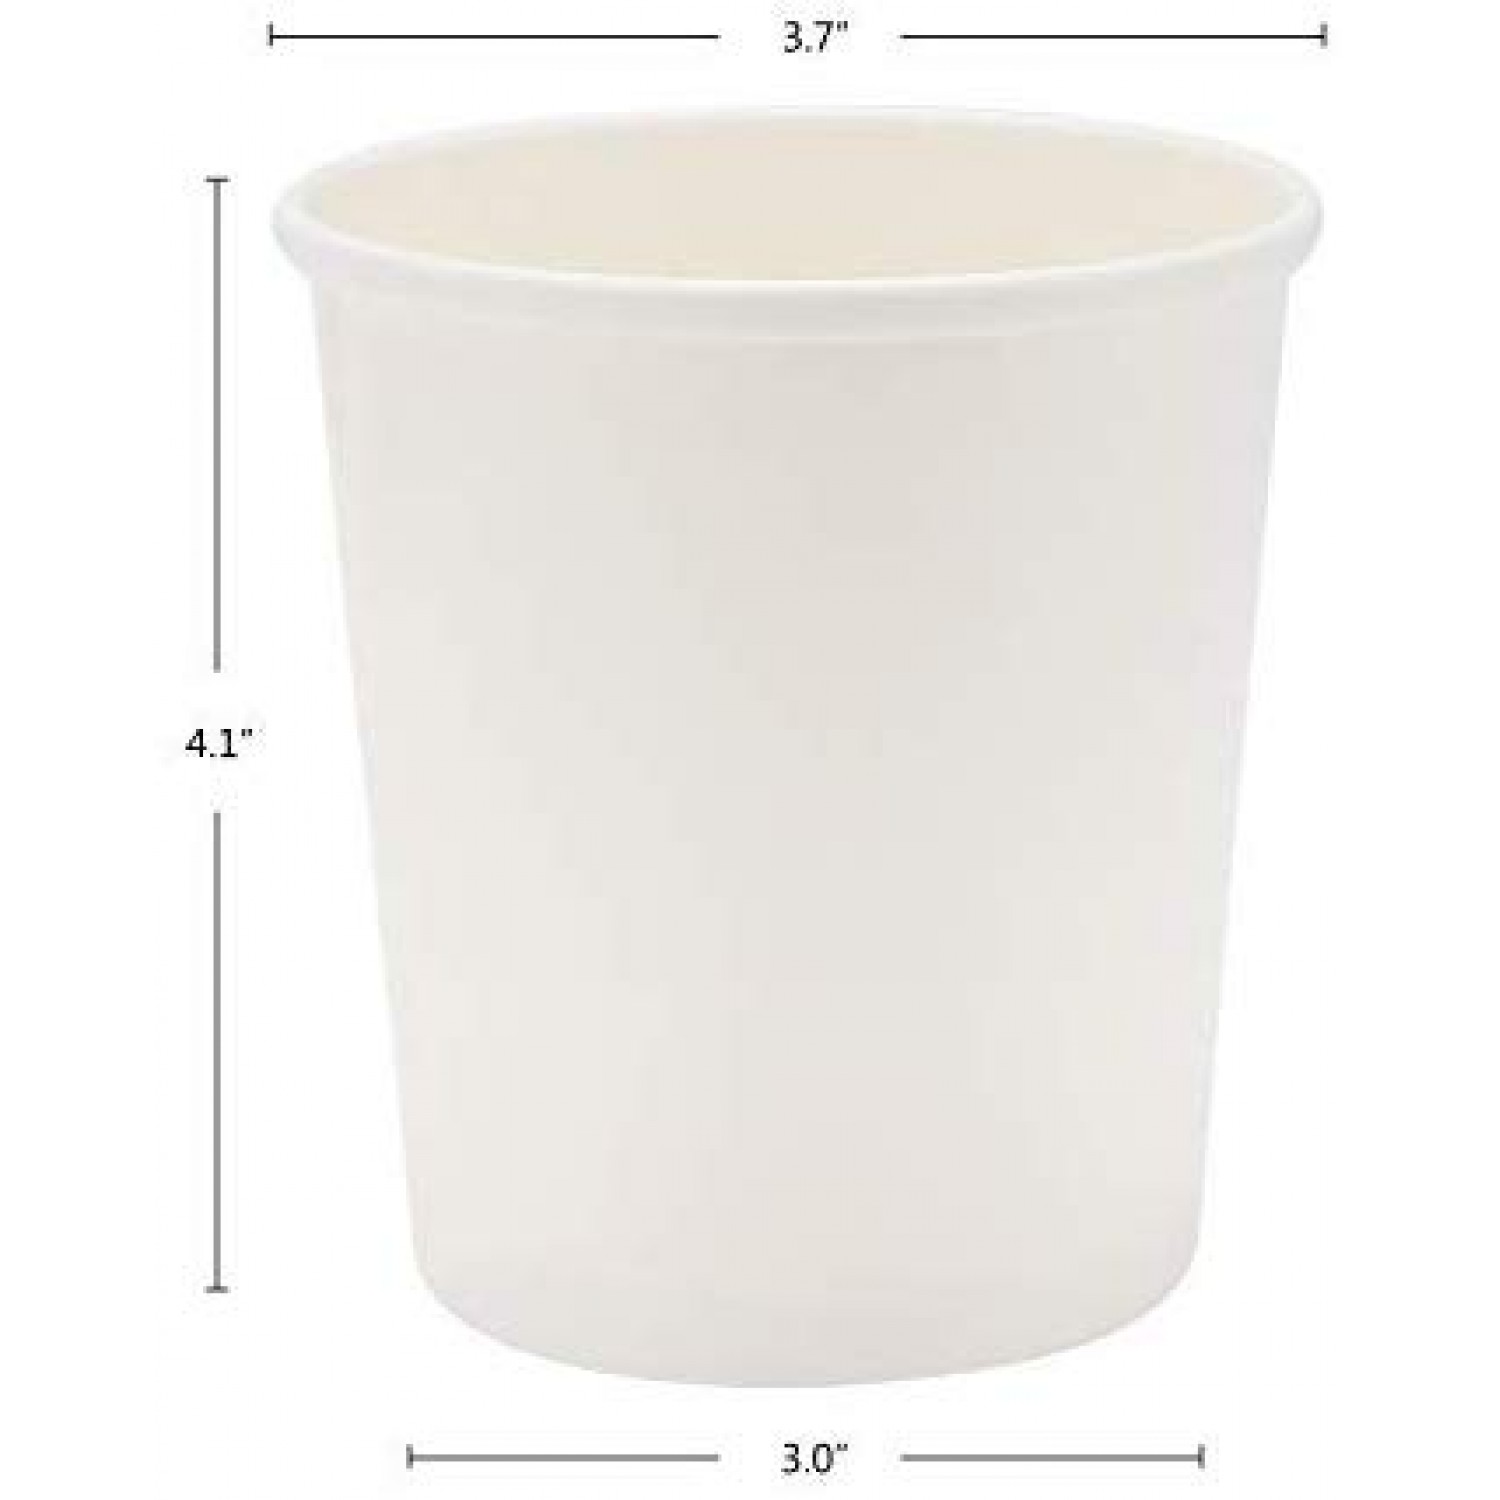 New Ice Cream Pint Containers 16 Ounce Cups Creamy Ice Cream Maker